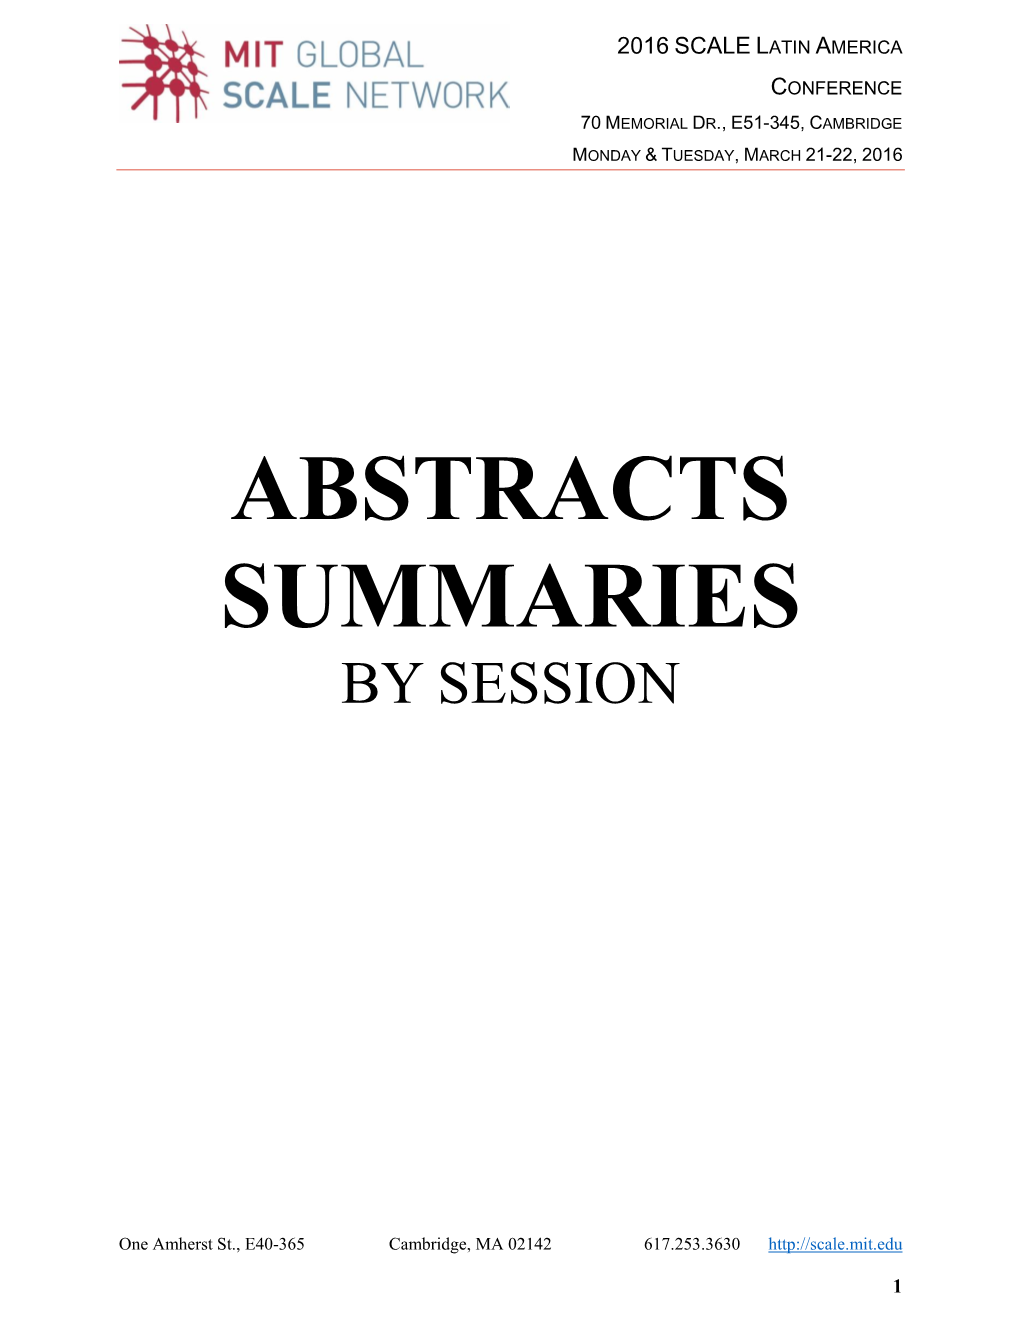 Abstracts Summaries by Session